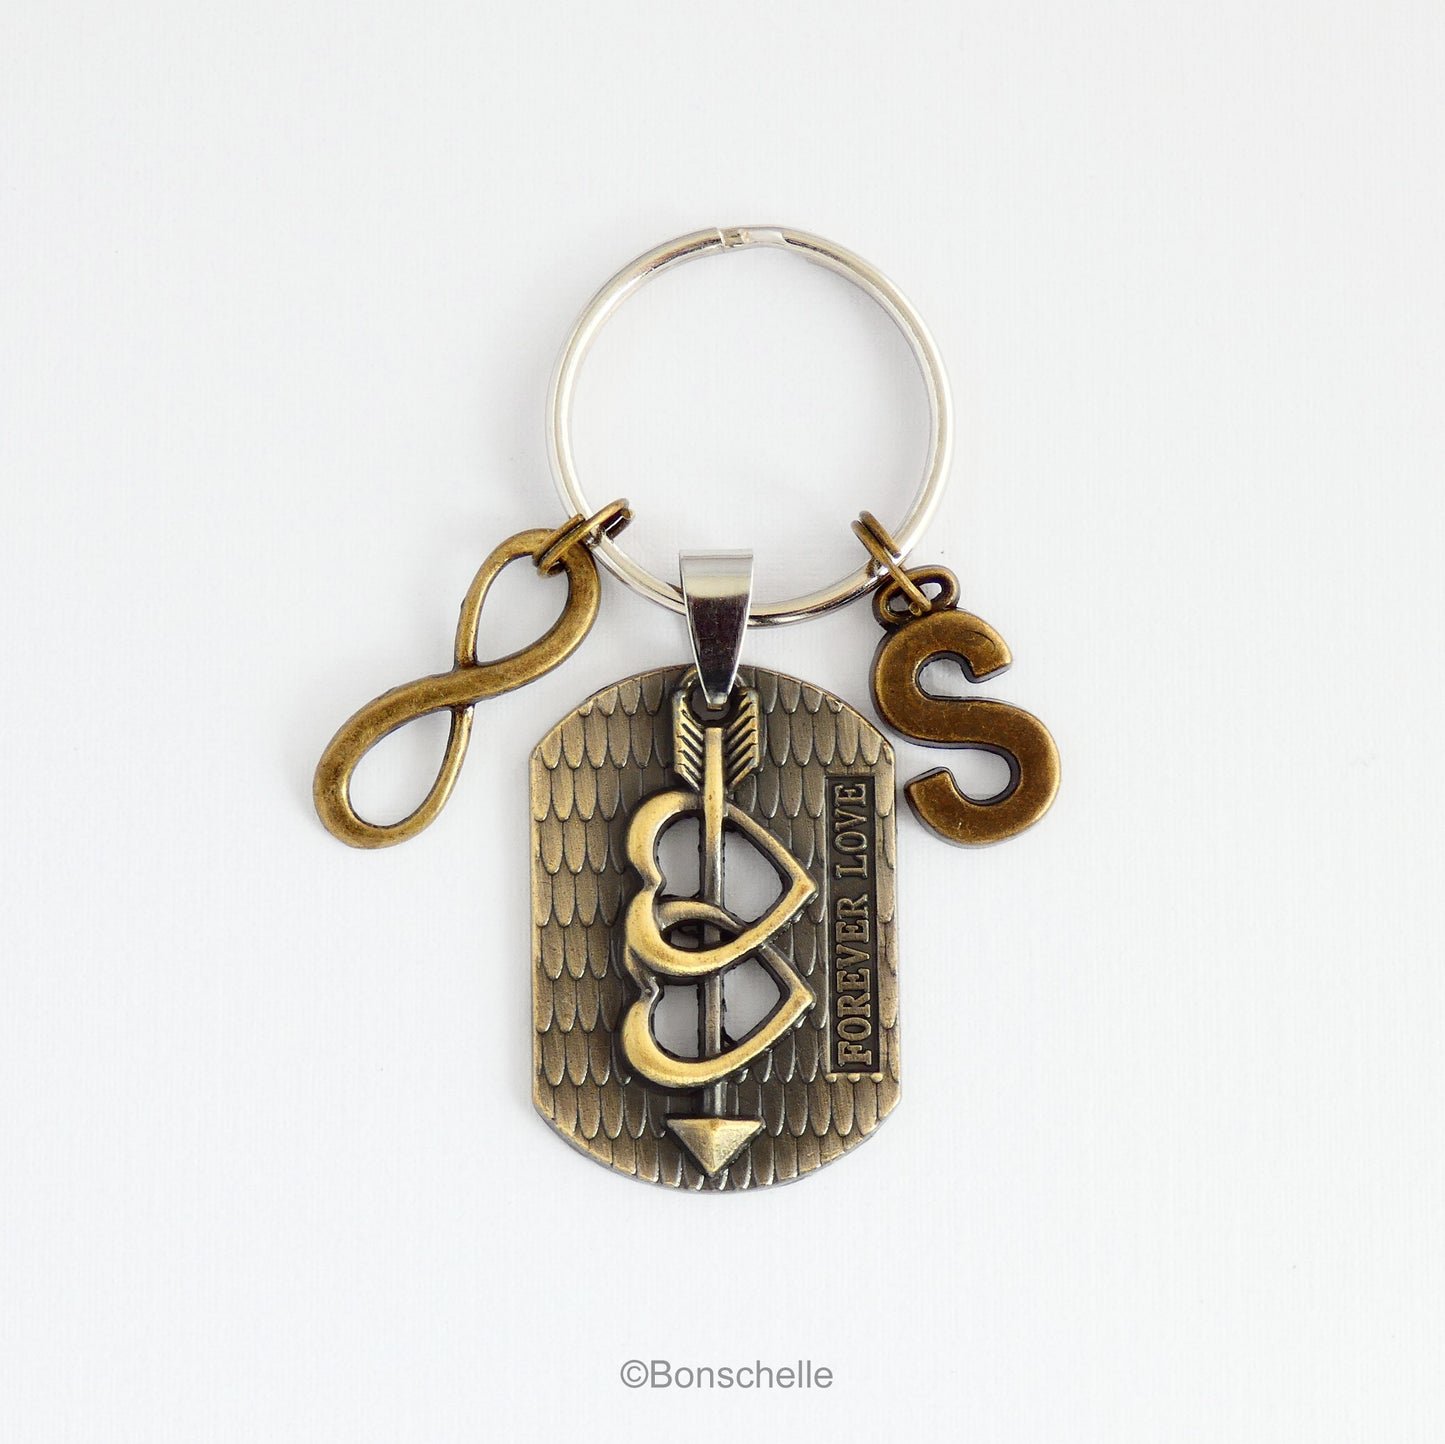 An antique bronze toned keyring with a focal charm featuring two hearts and an arrow and the words 'forever Love', pluse an optional initial charm and an infinity sign charm.